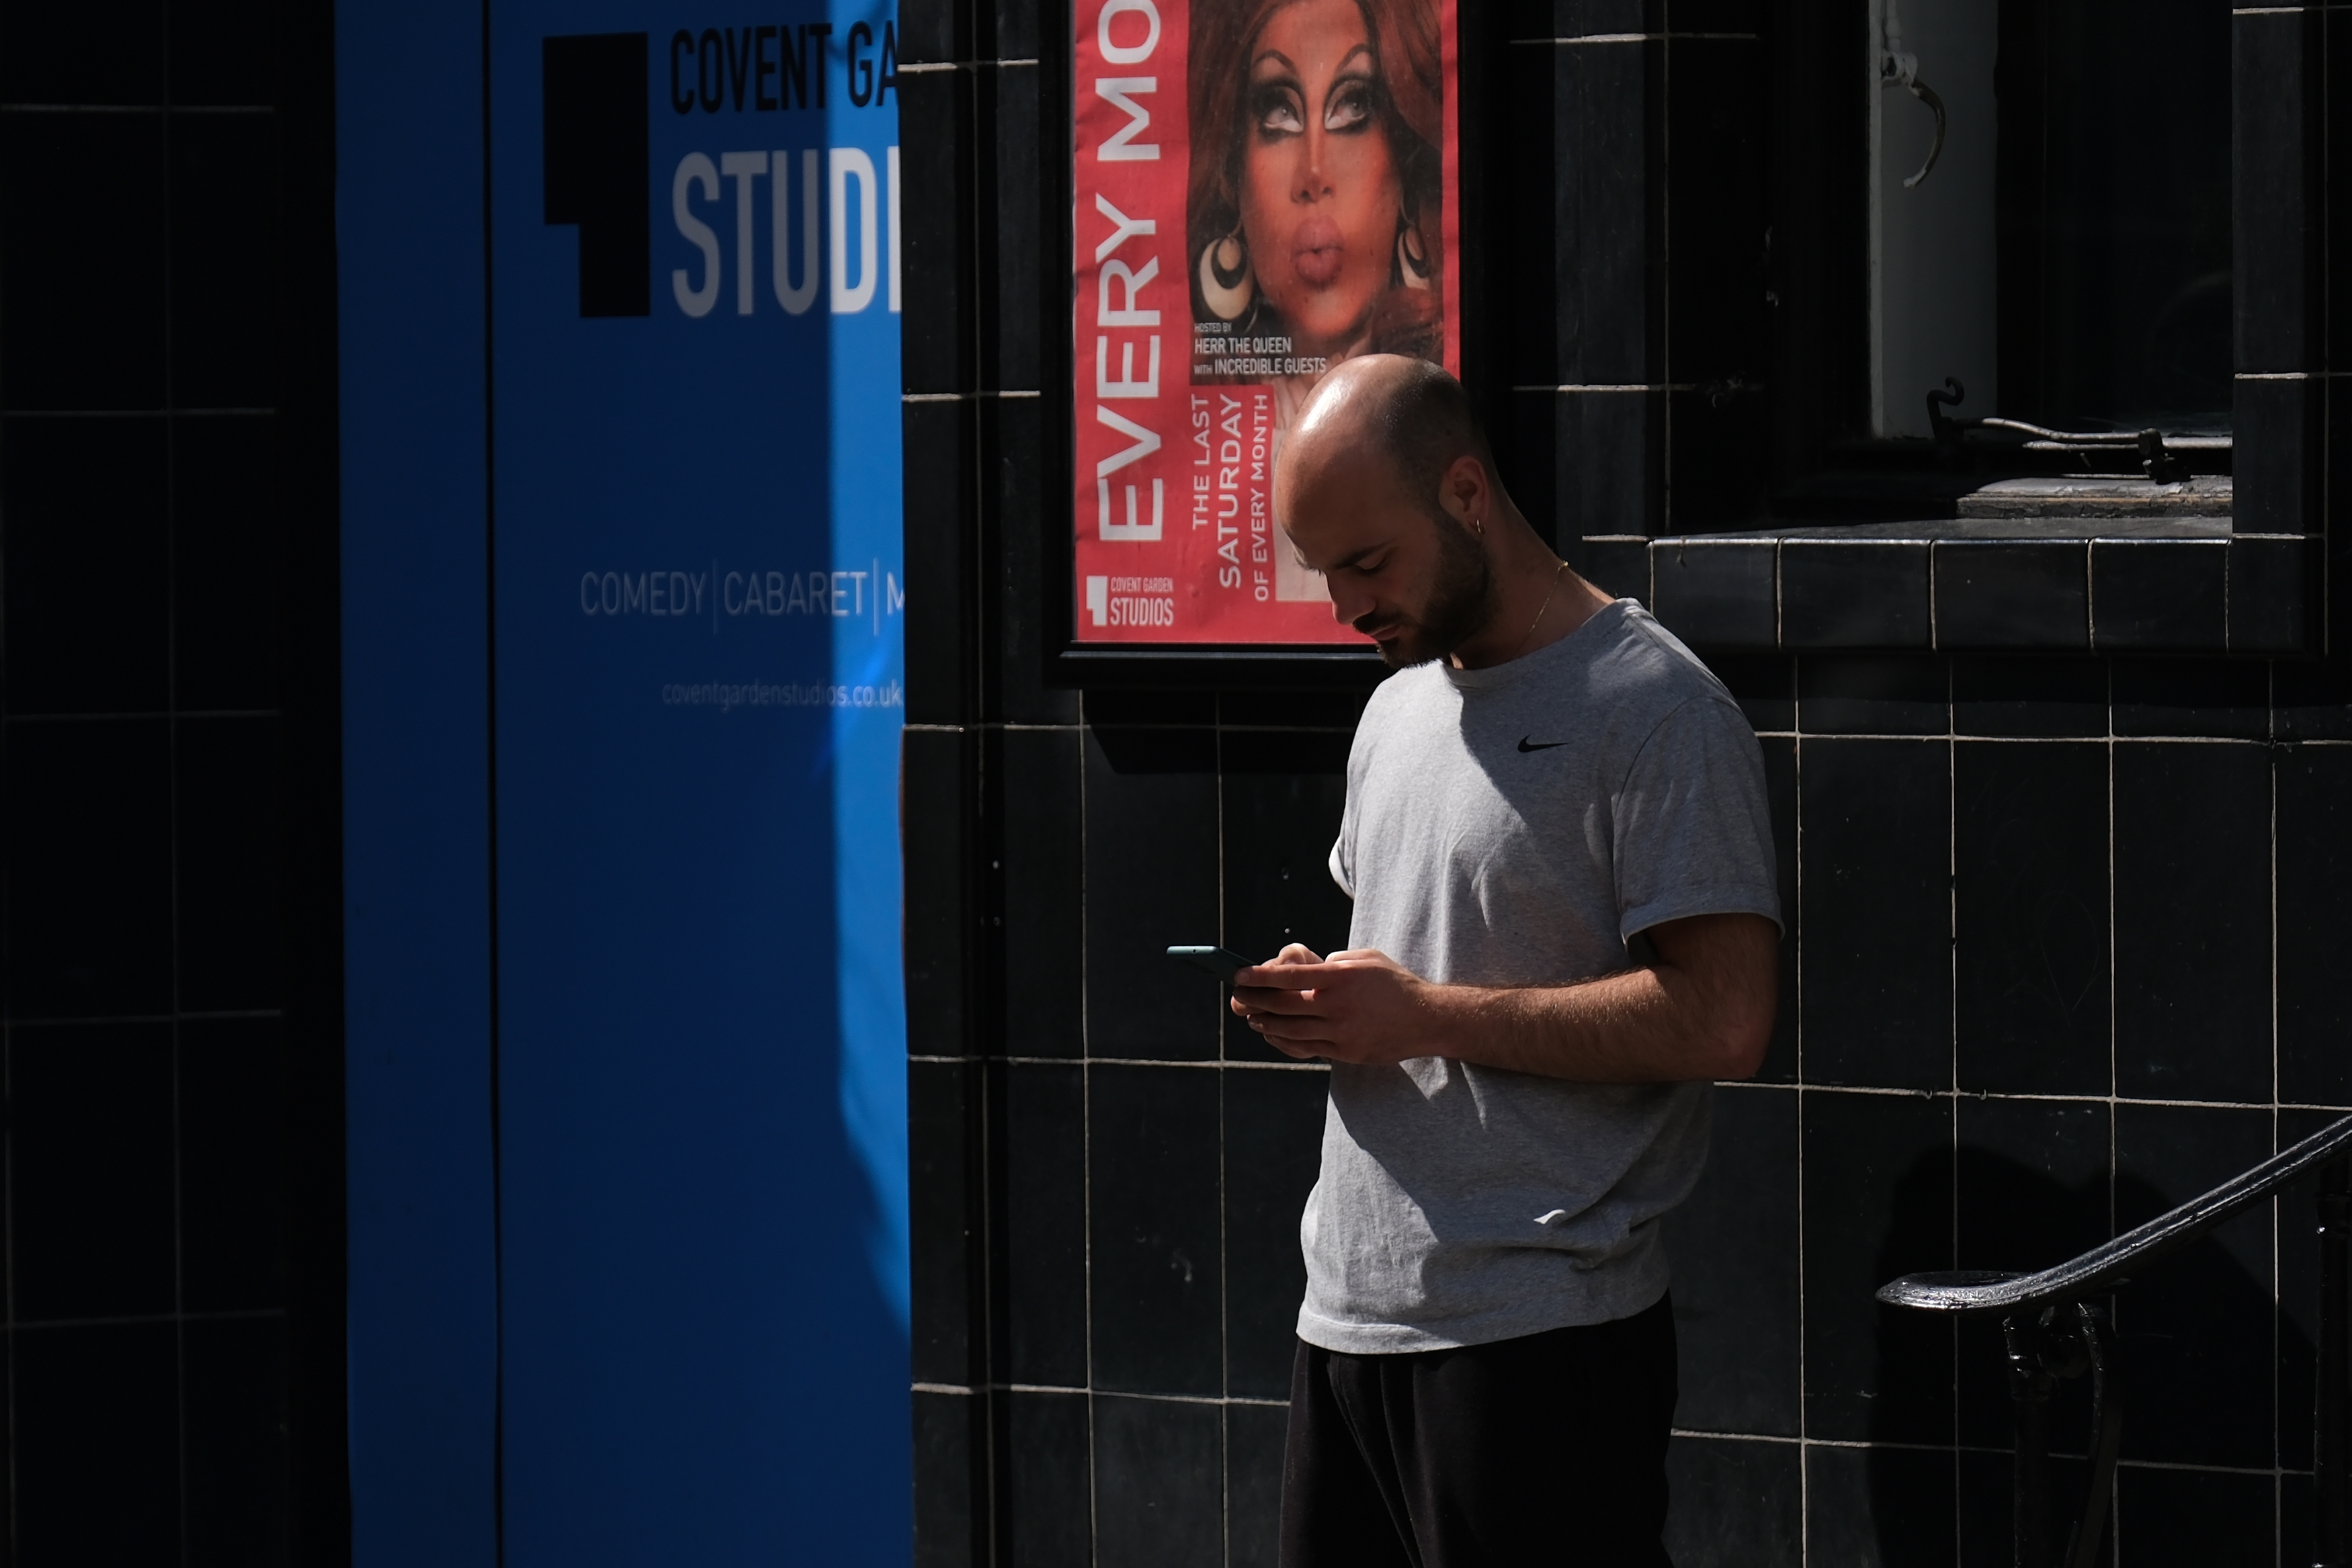 A man looking at his phone on a London street